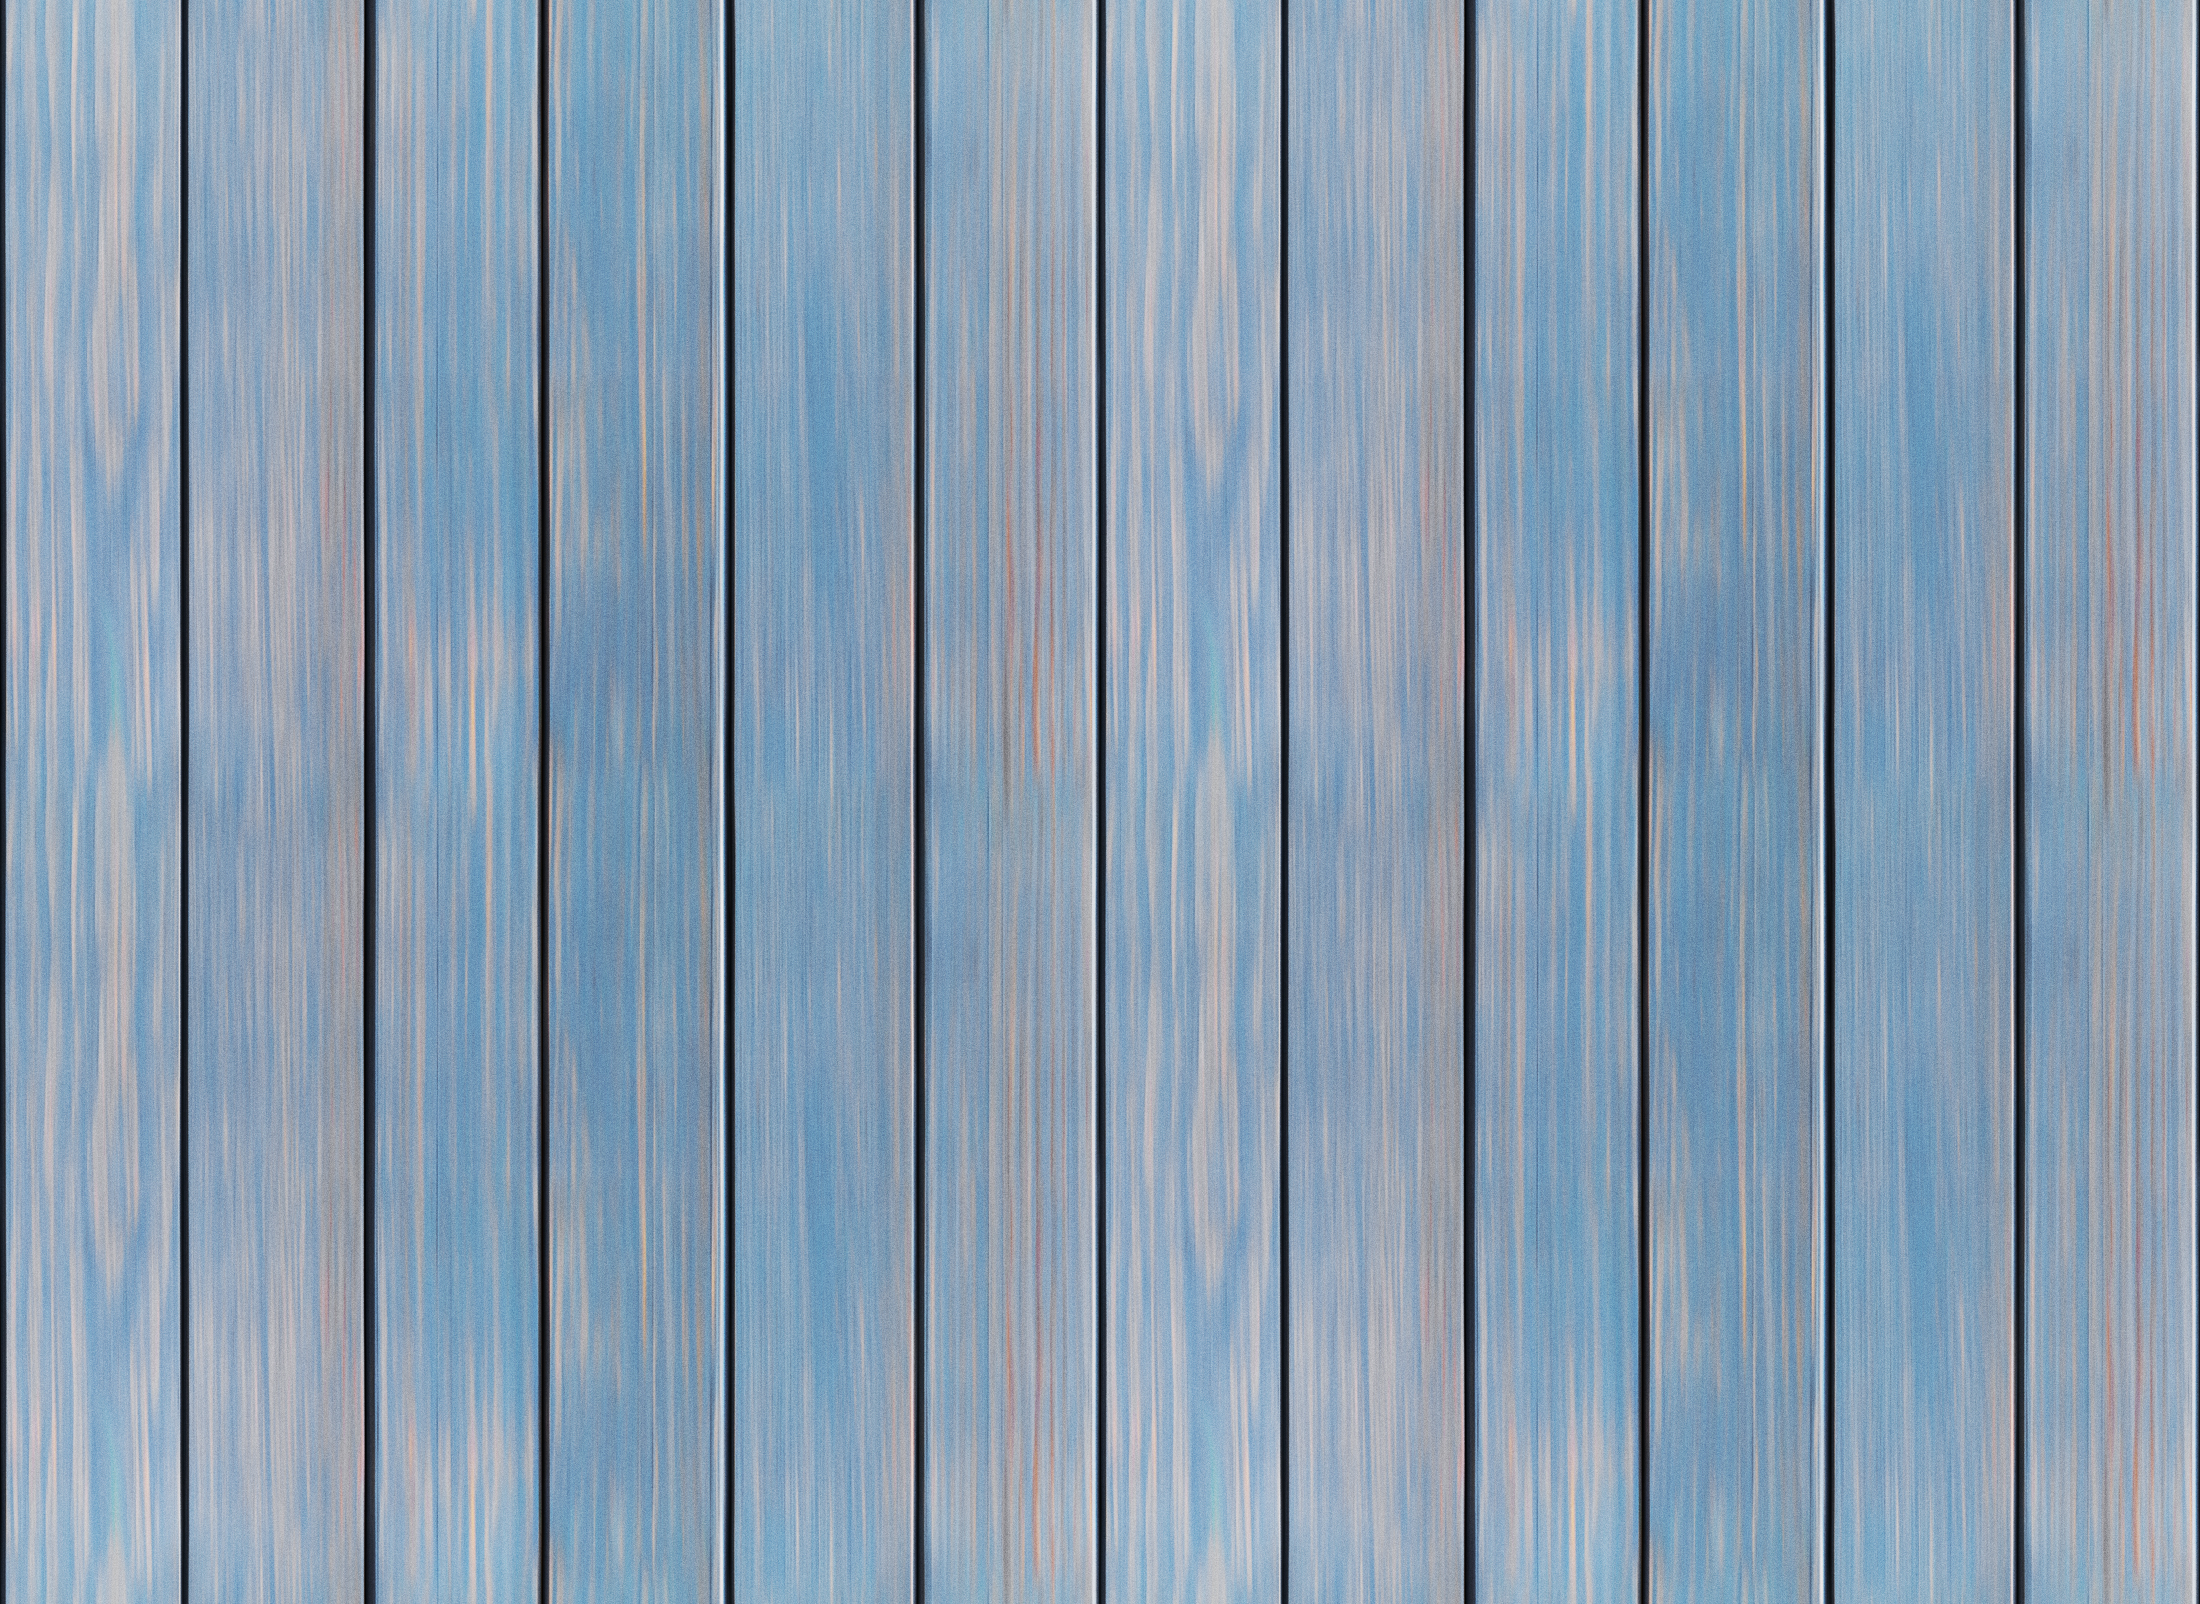 Dark Blue Wood Texture Stained Wooden Boards